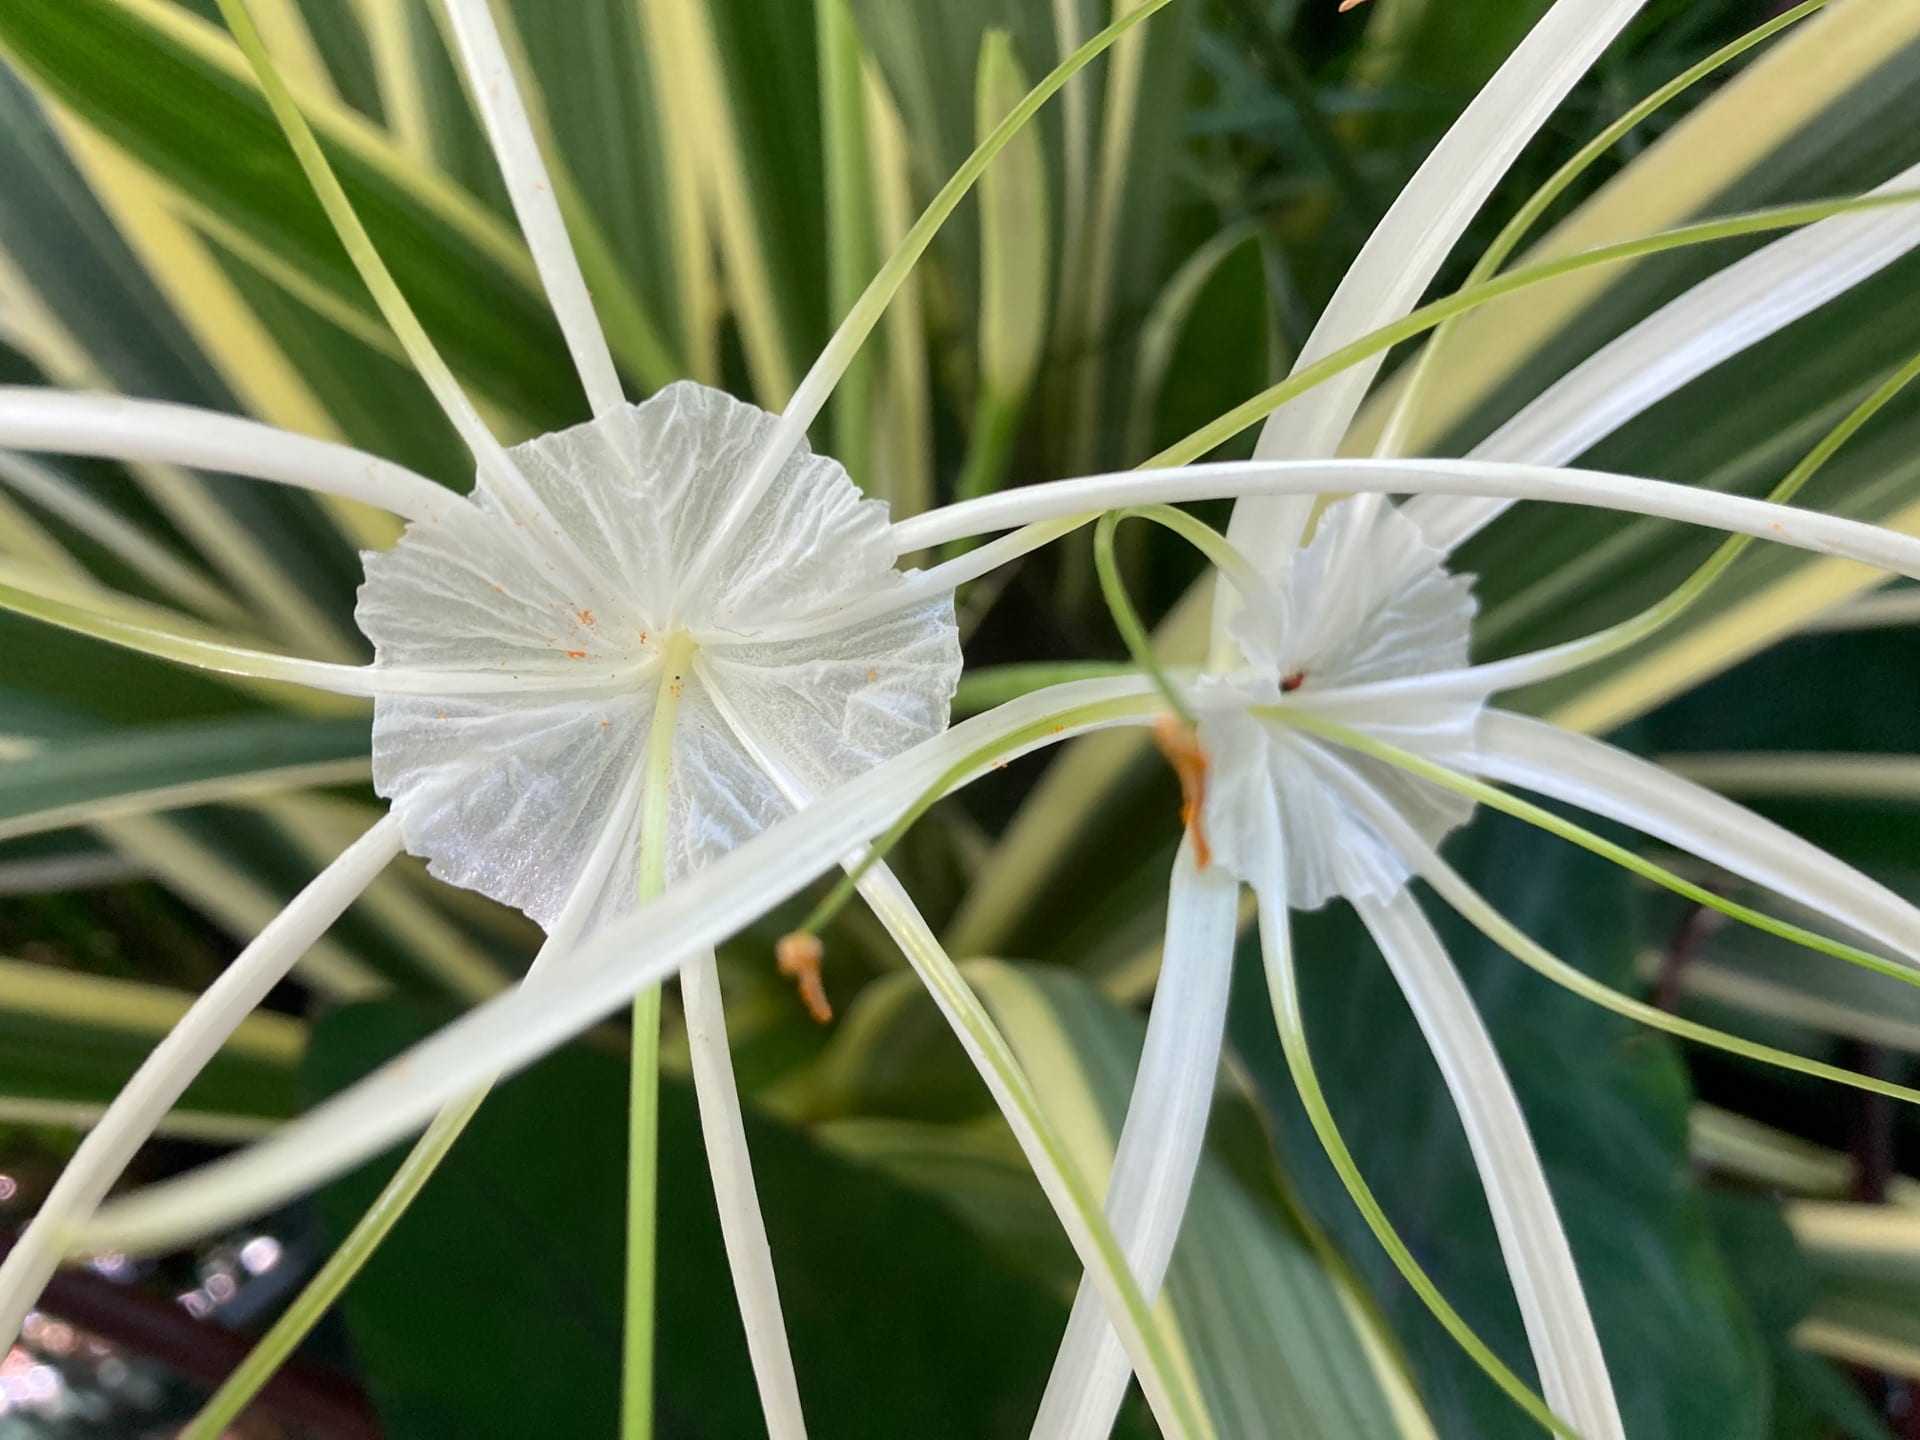 The Caribbean spider lily, Hymenocallis caribaea, is a bulbous perennial that has adapted to be able to grow completely submerged in water.